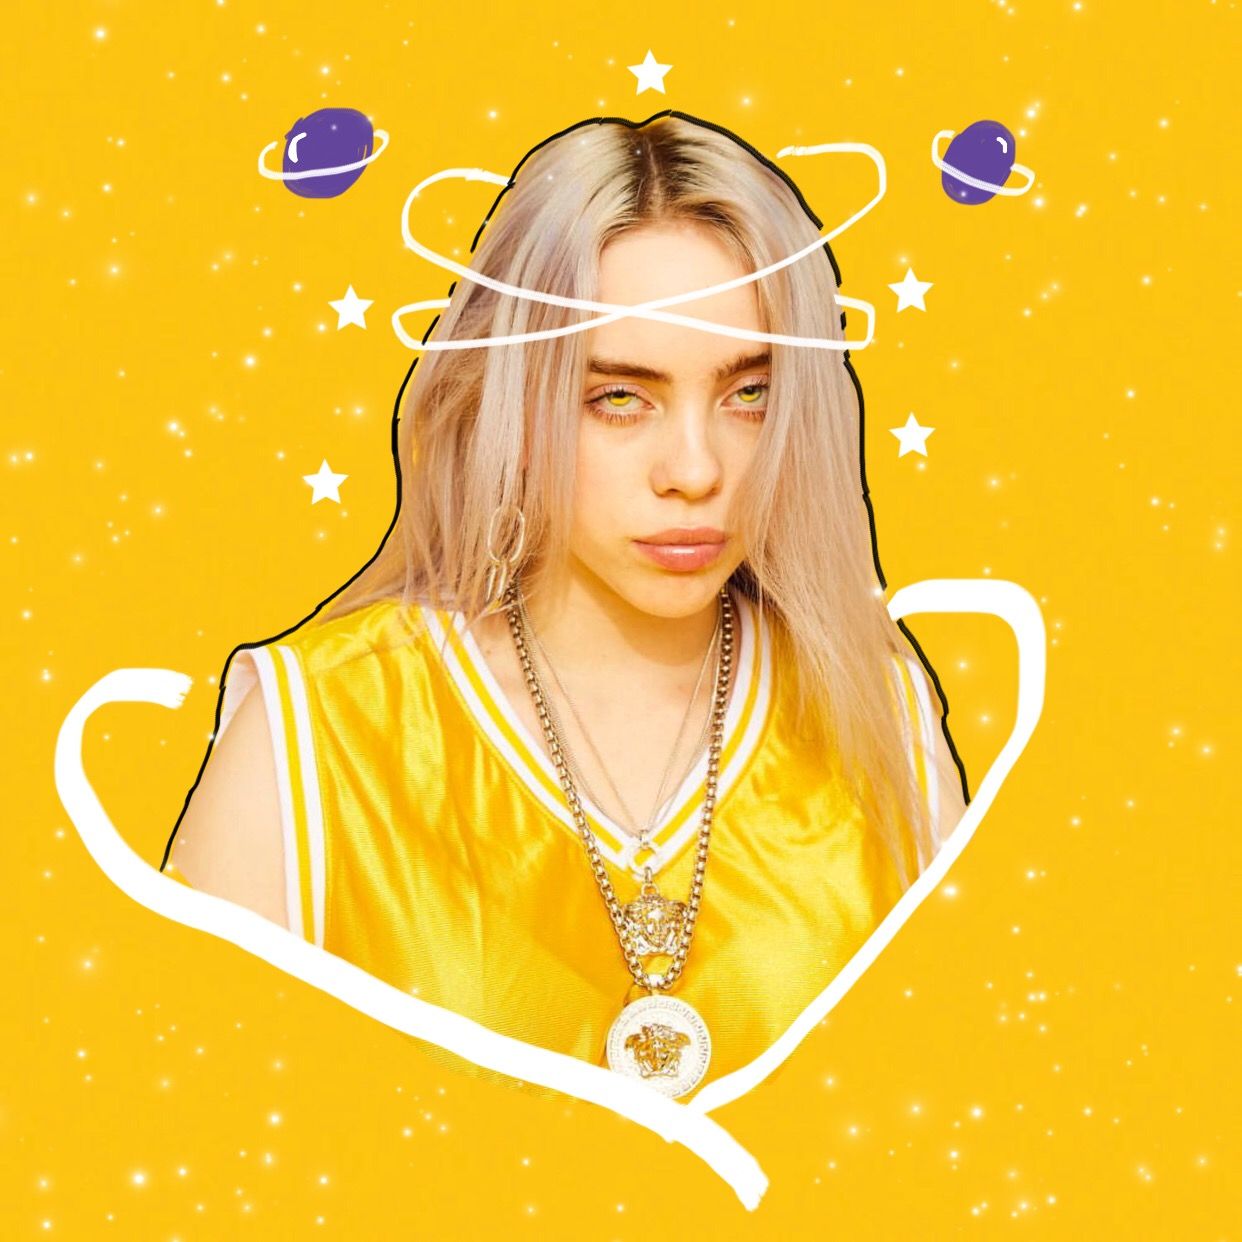 Billie Eilish with a yellow background and white heart outline - Billie Eilish